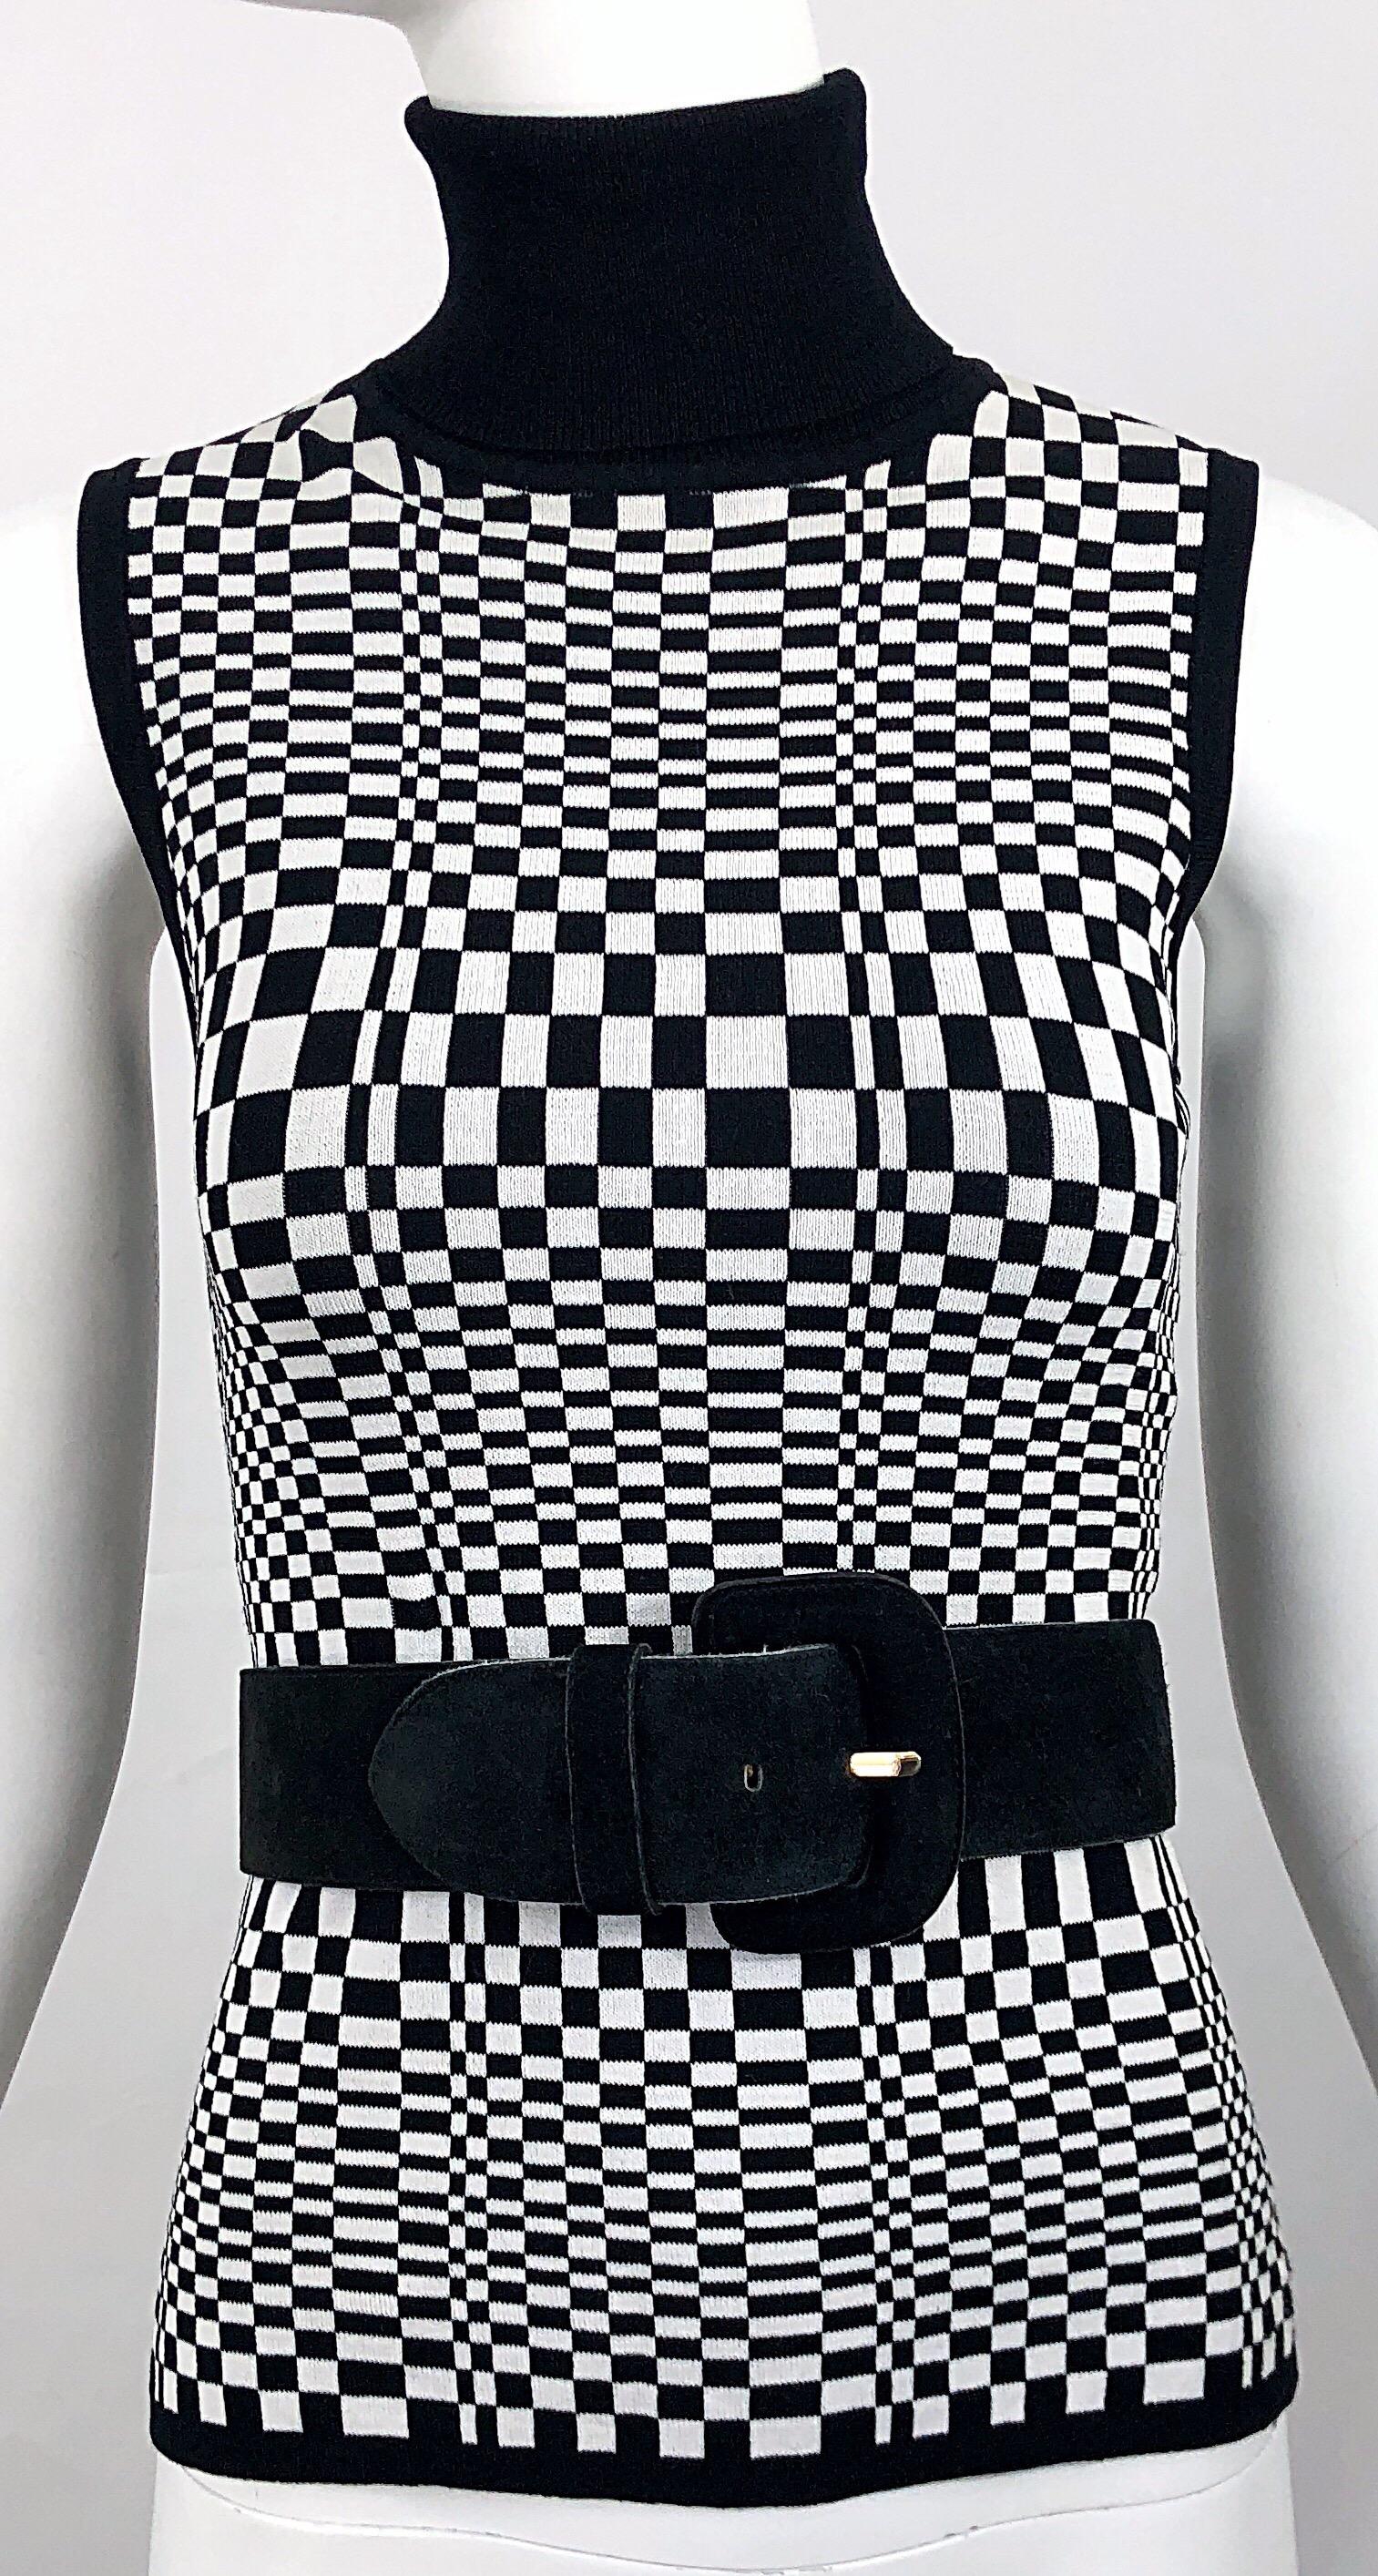 1990s Black and White Op Art 3 - D Print Sleeveless Vintage Knit Turtleneck Top In Excellent Condition For Sale In San Diego, CA